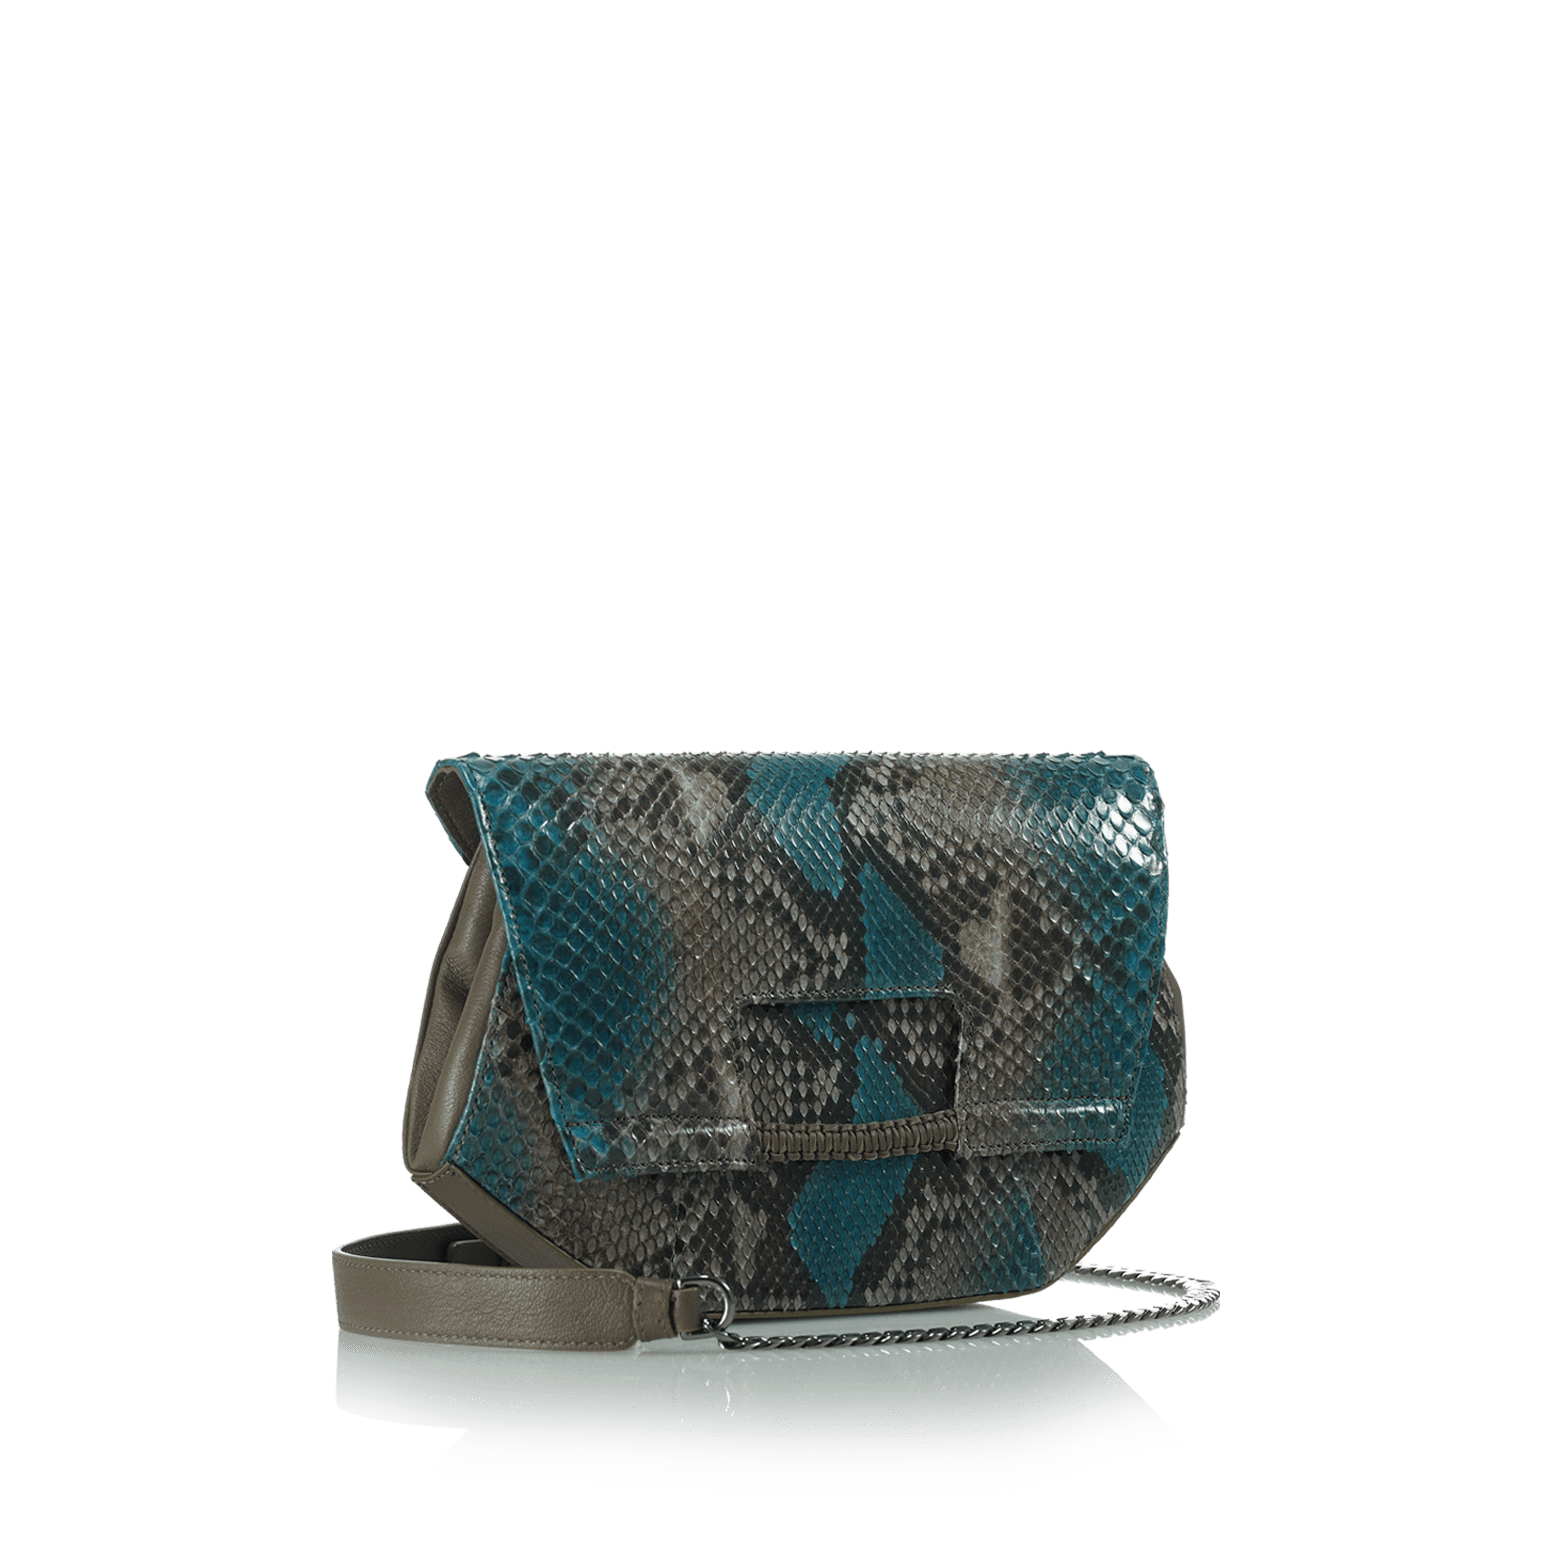 FL by NADA SAWAYA Clutch Teal and Taupe Alma - Python and Leather Clutch